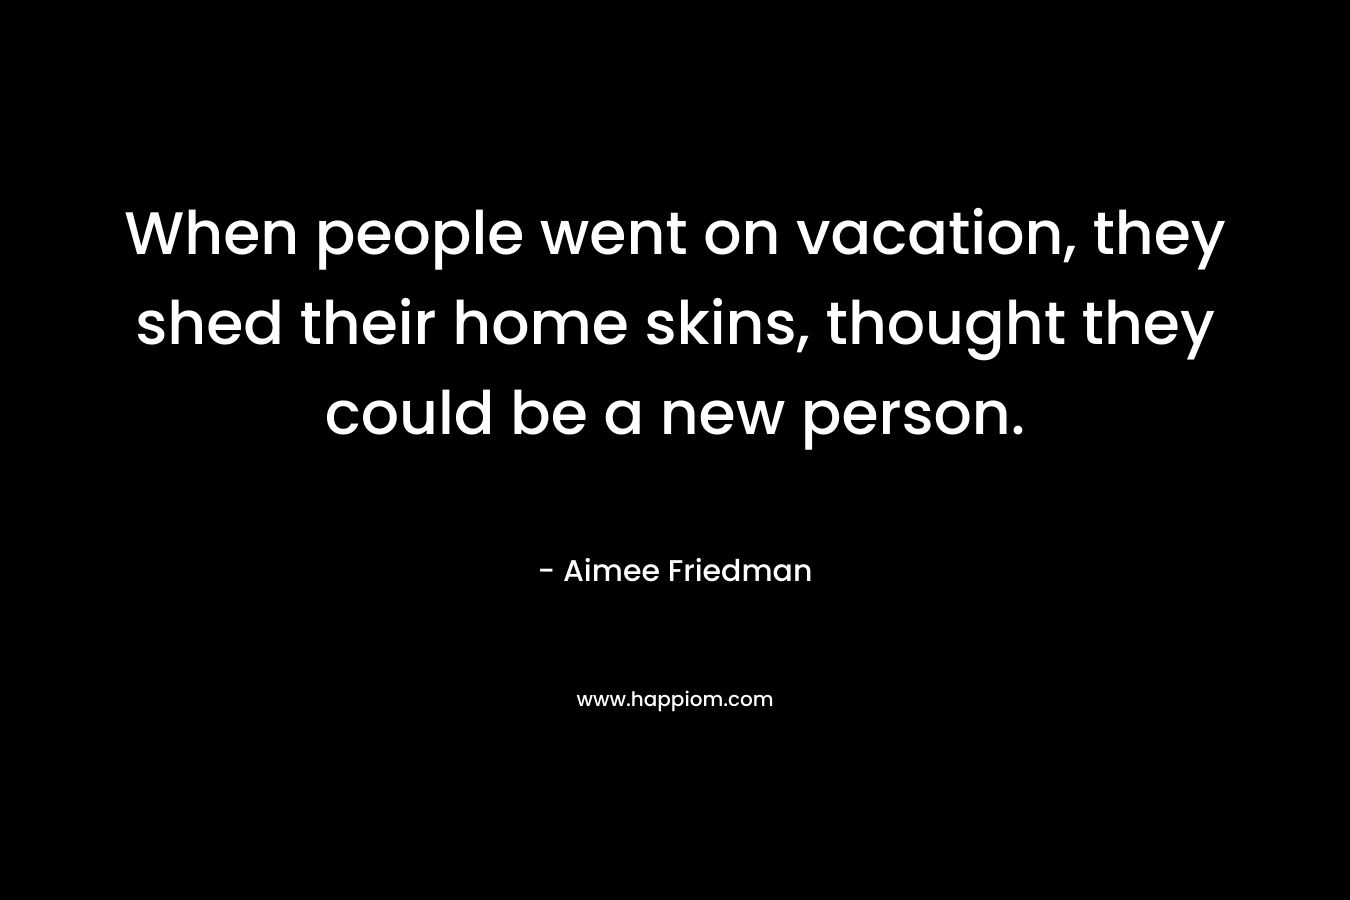 When people went on vacation, they shed their home skins, thought they could be a new person.